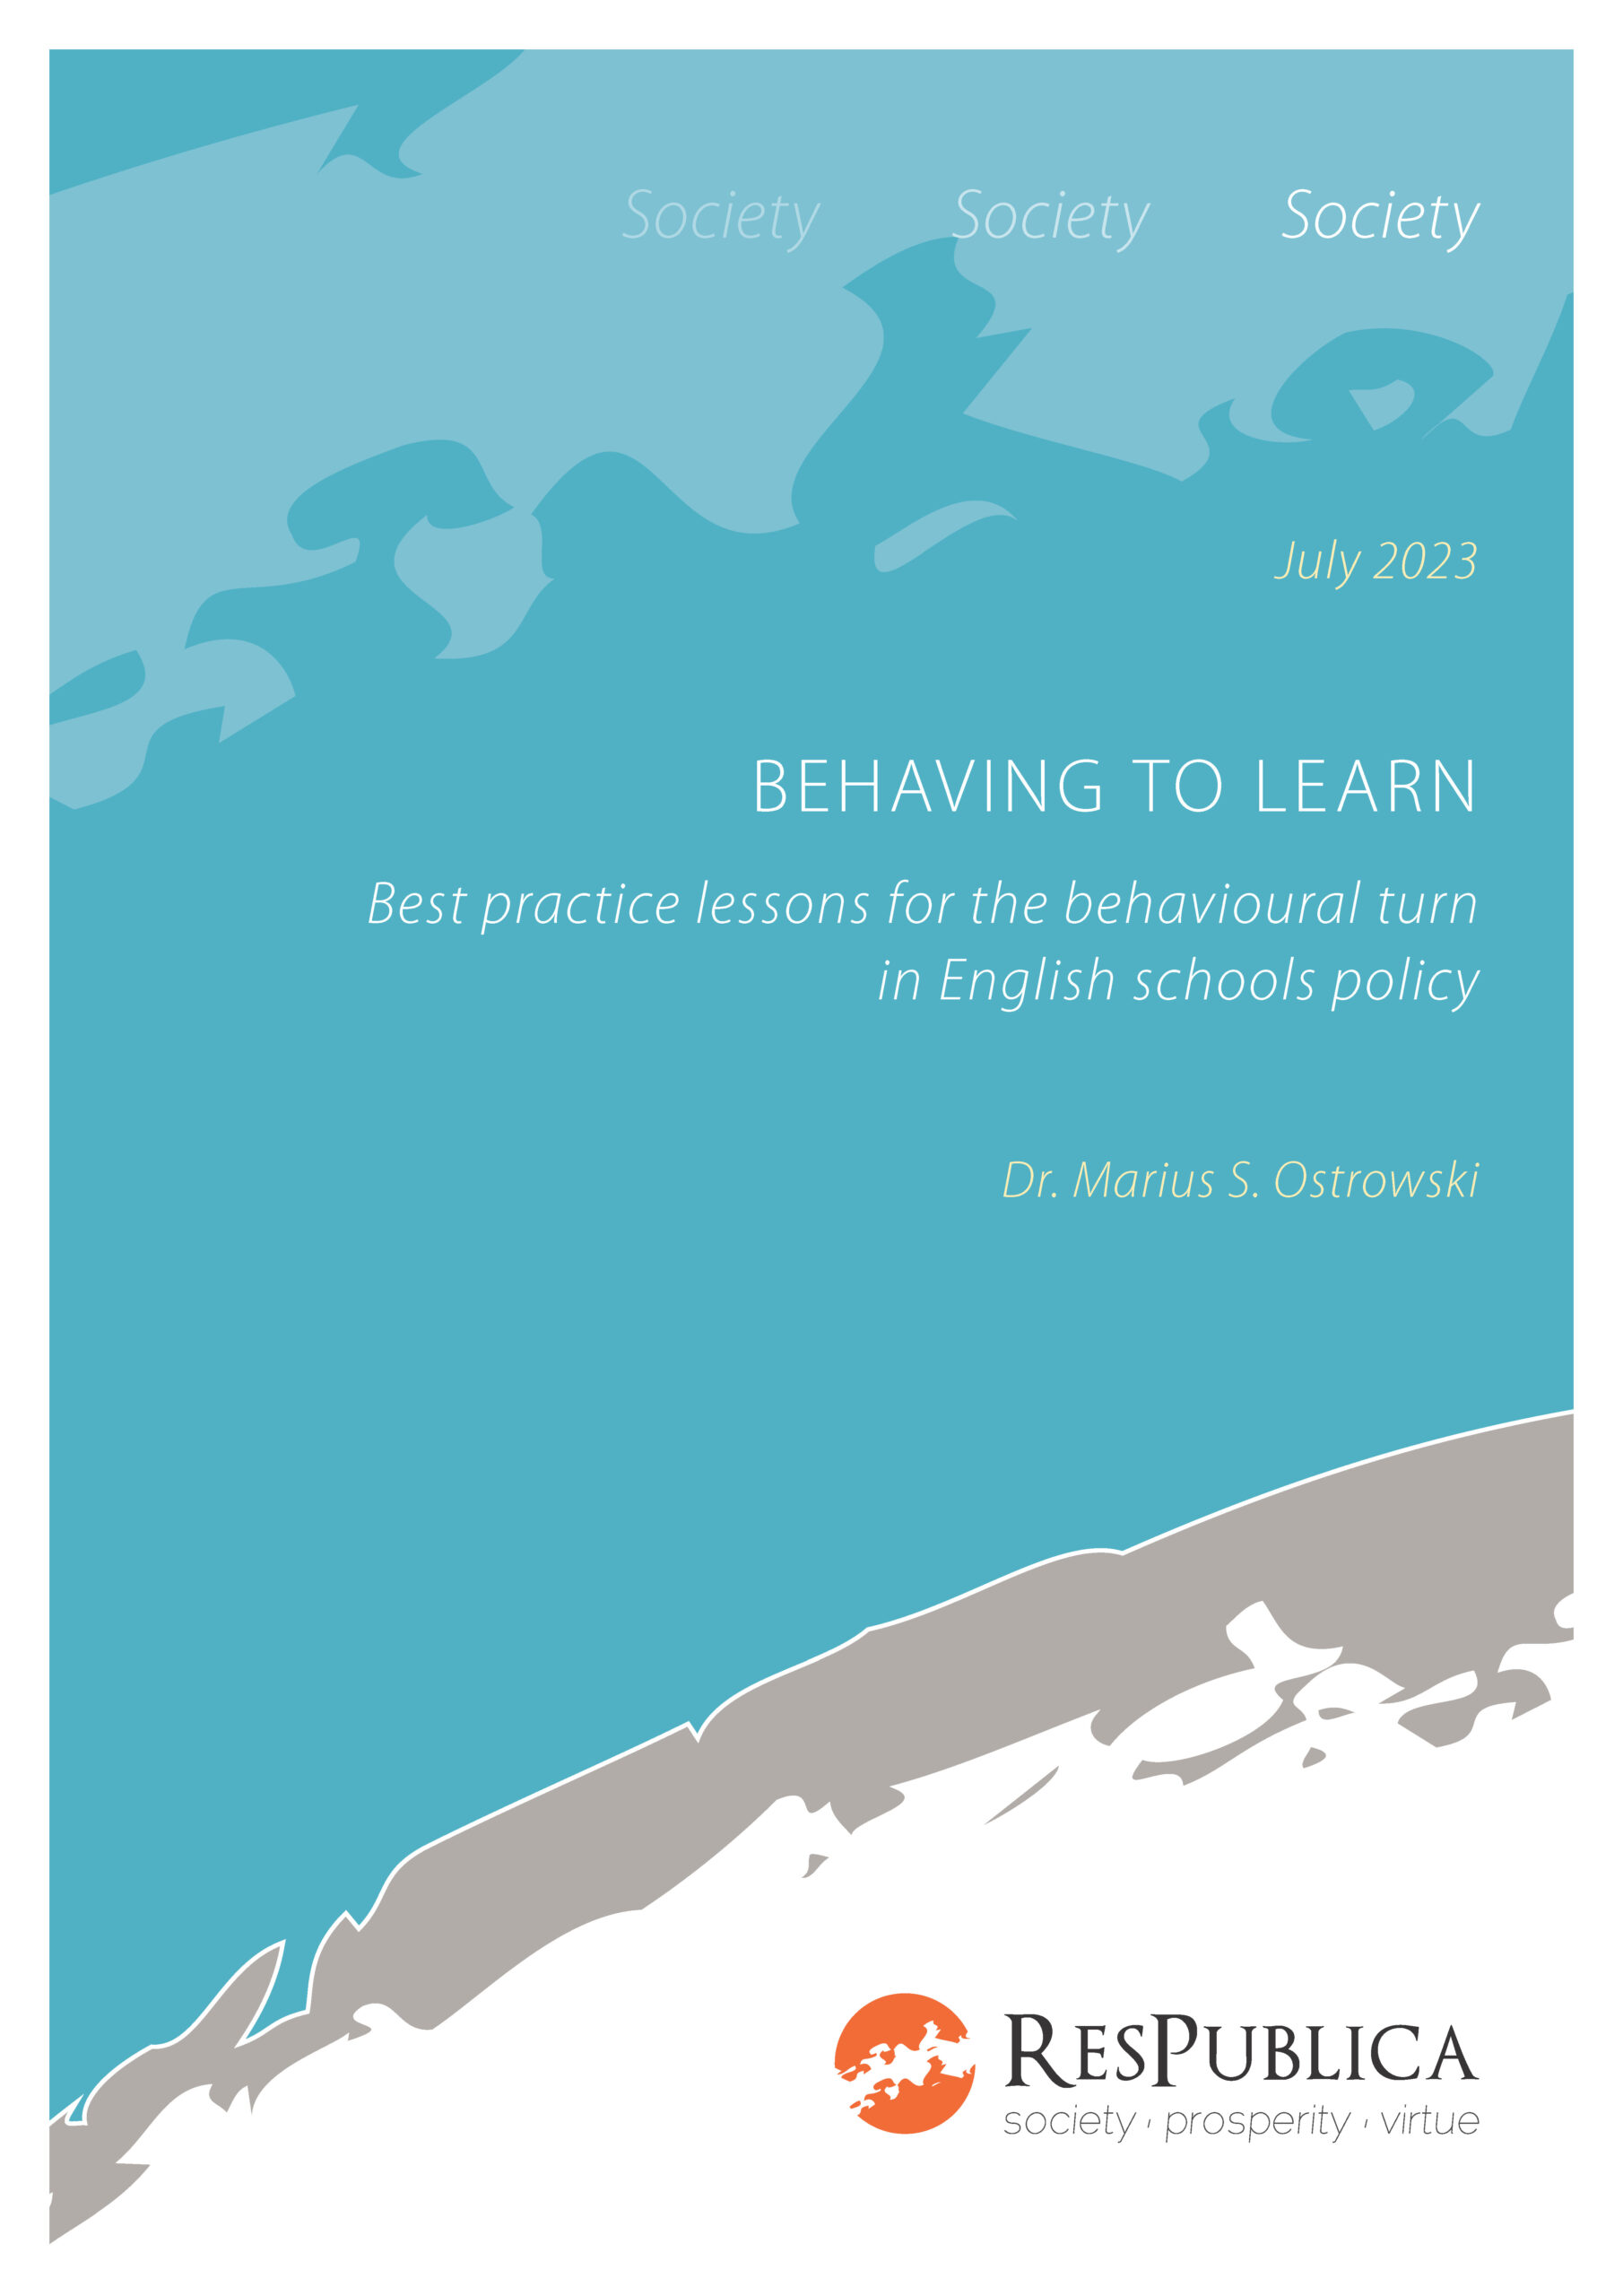 Behaving to Learn: Best practice lessons for the behavioural turn in English schools policy